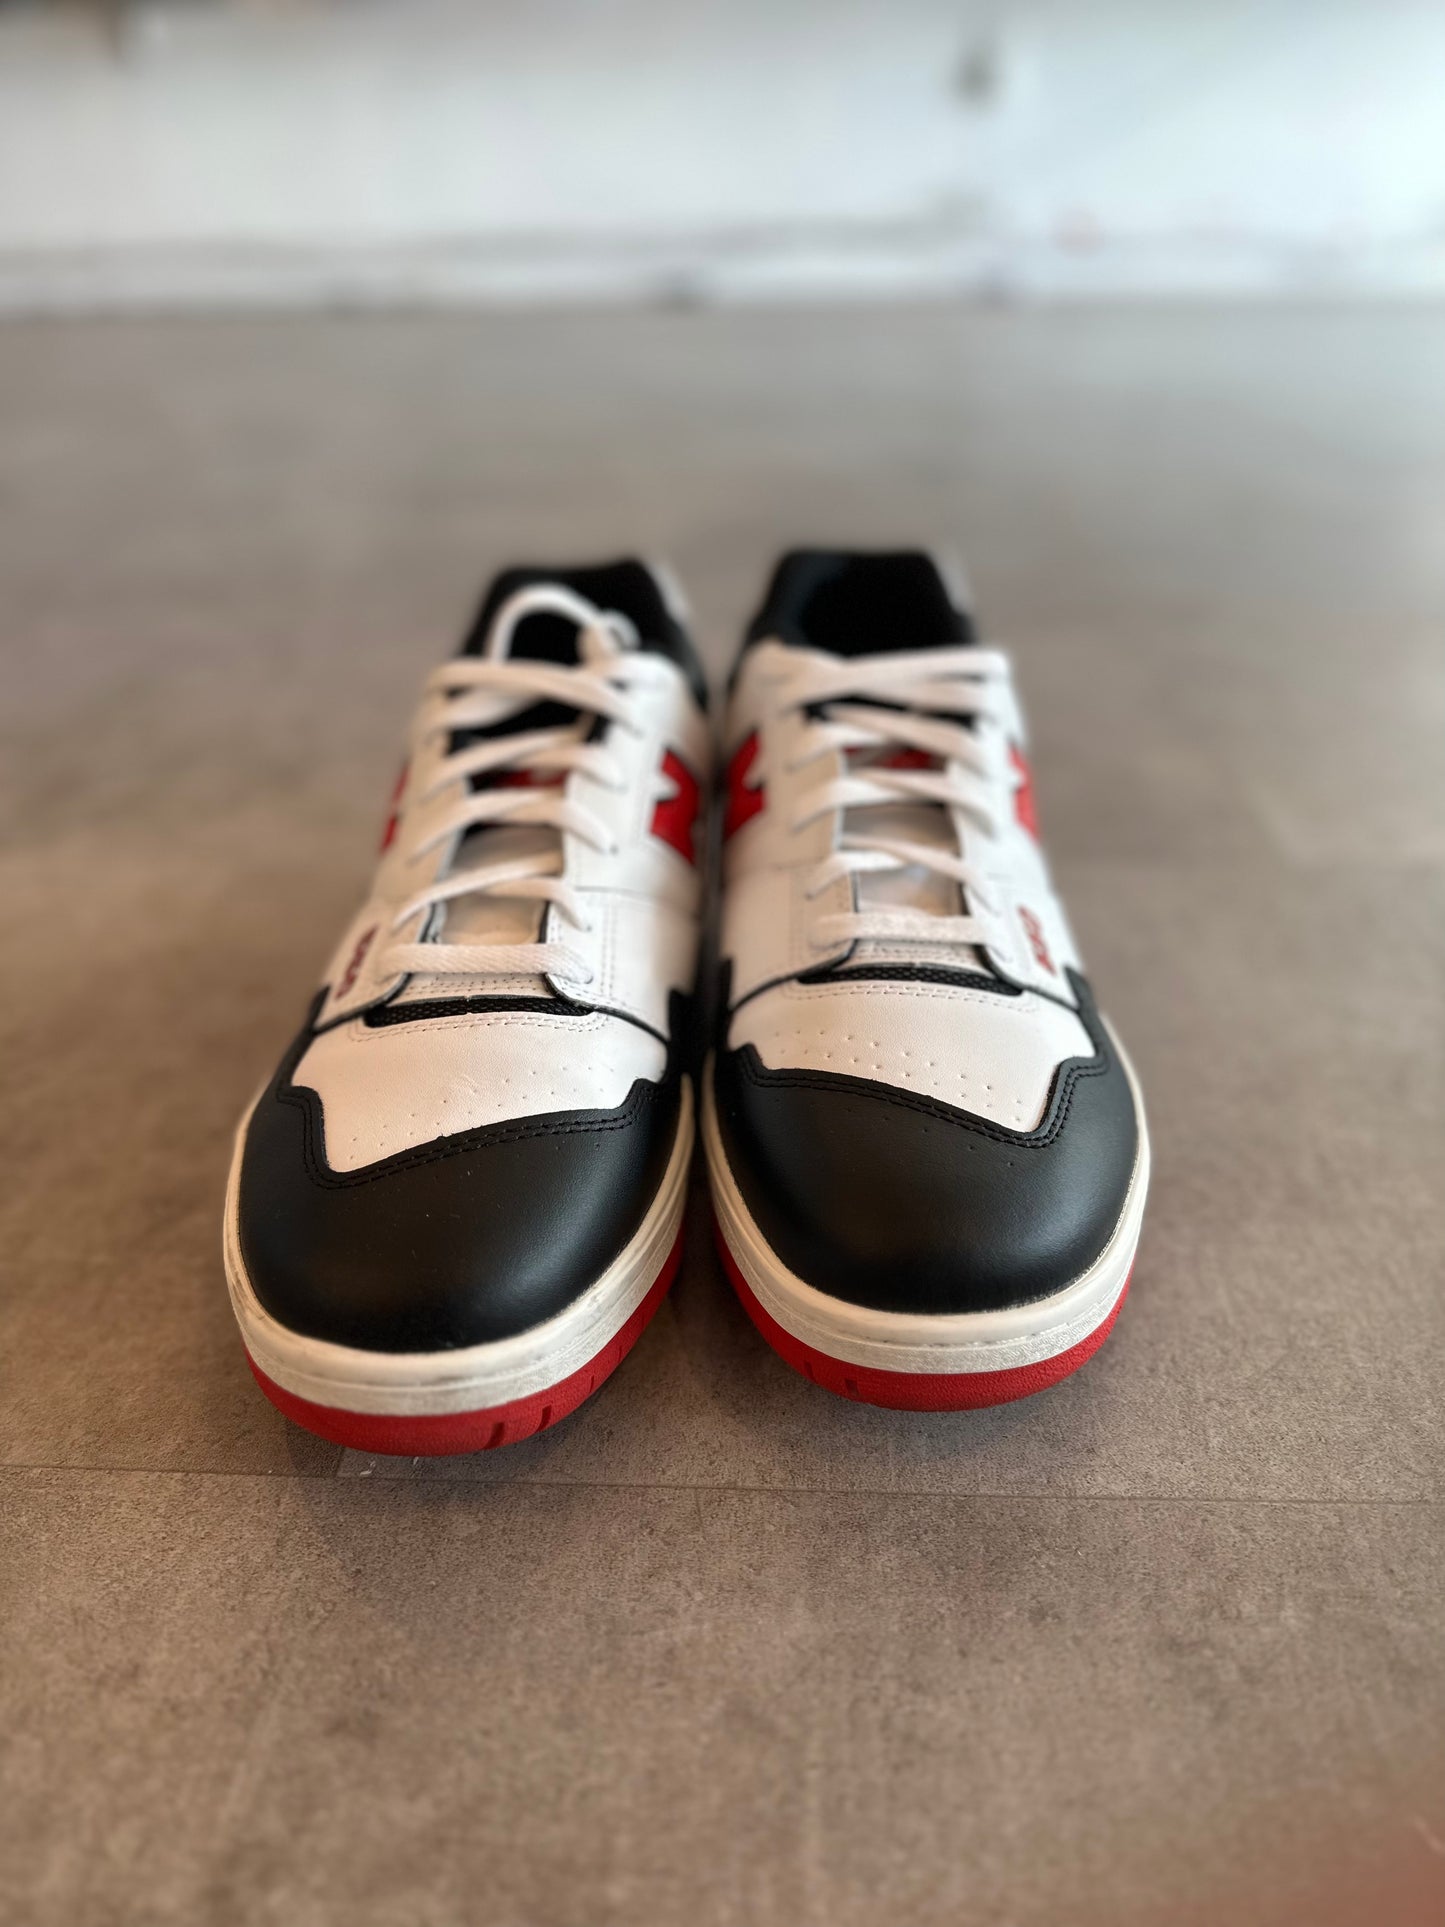 New Balance 550 White Red Black (Preowned)